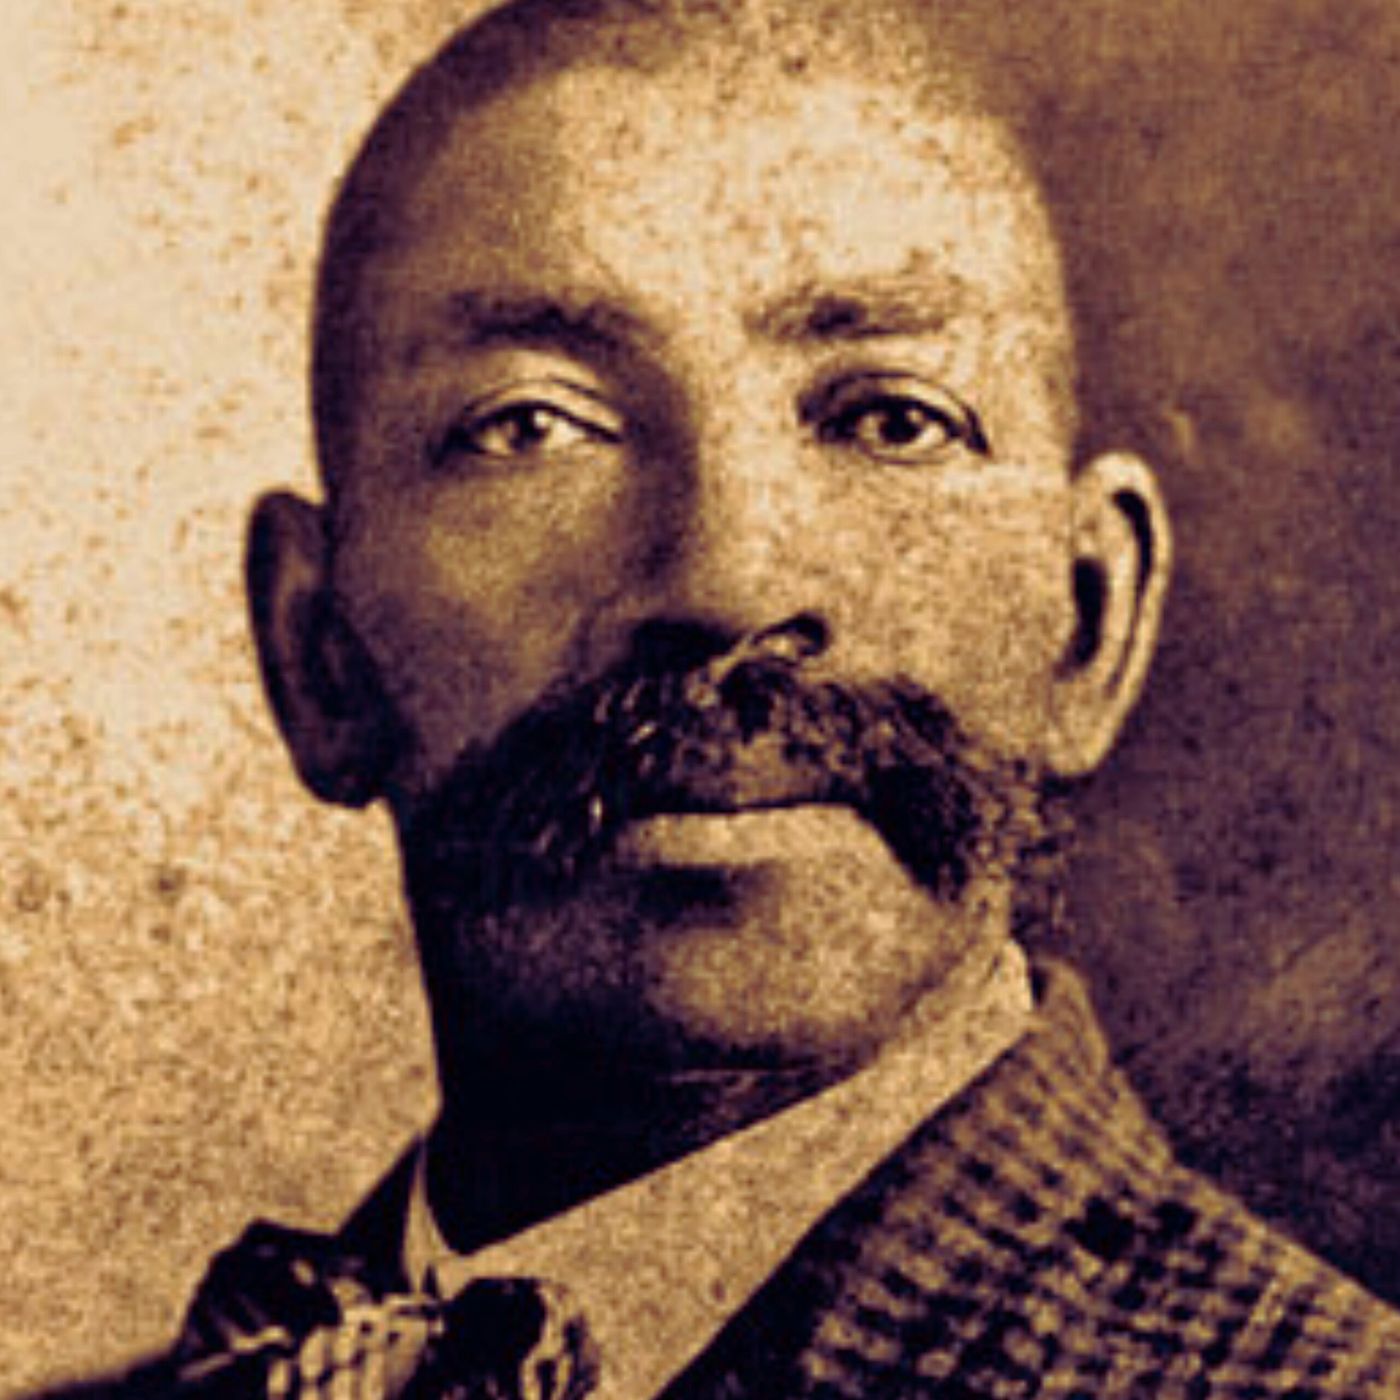 Bass Reeves - Lawman by The Wild West Extravaganza